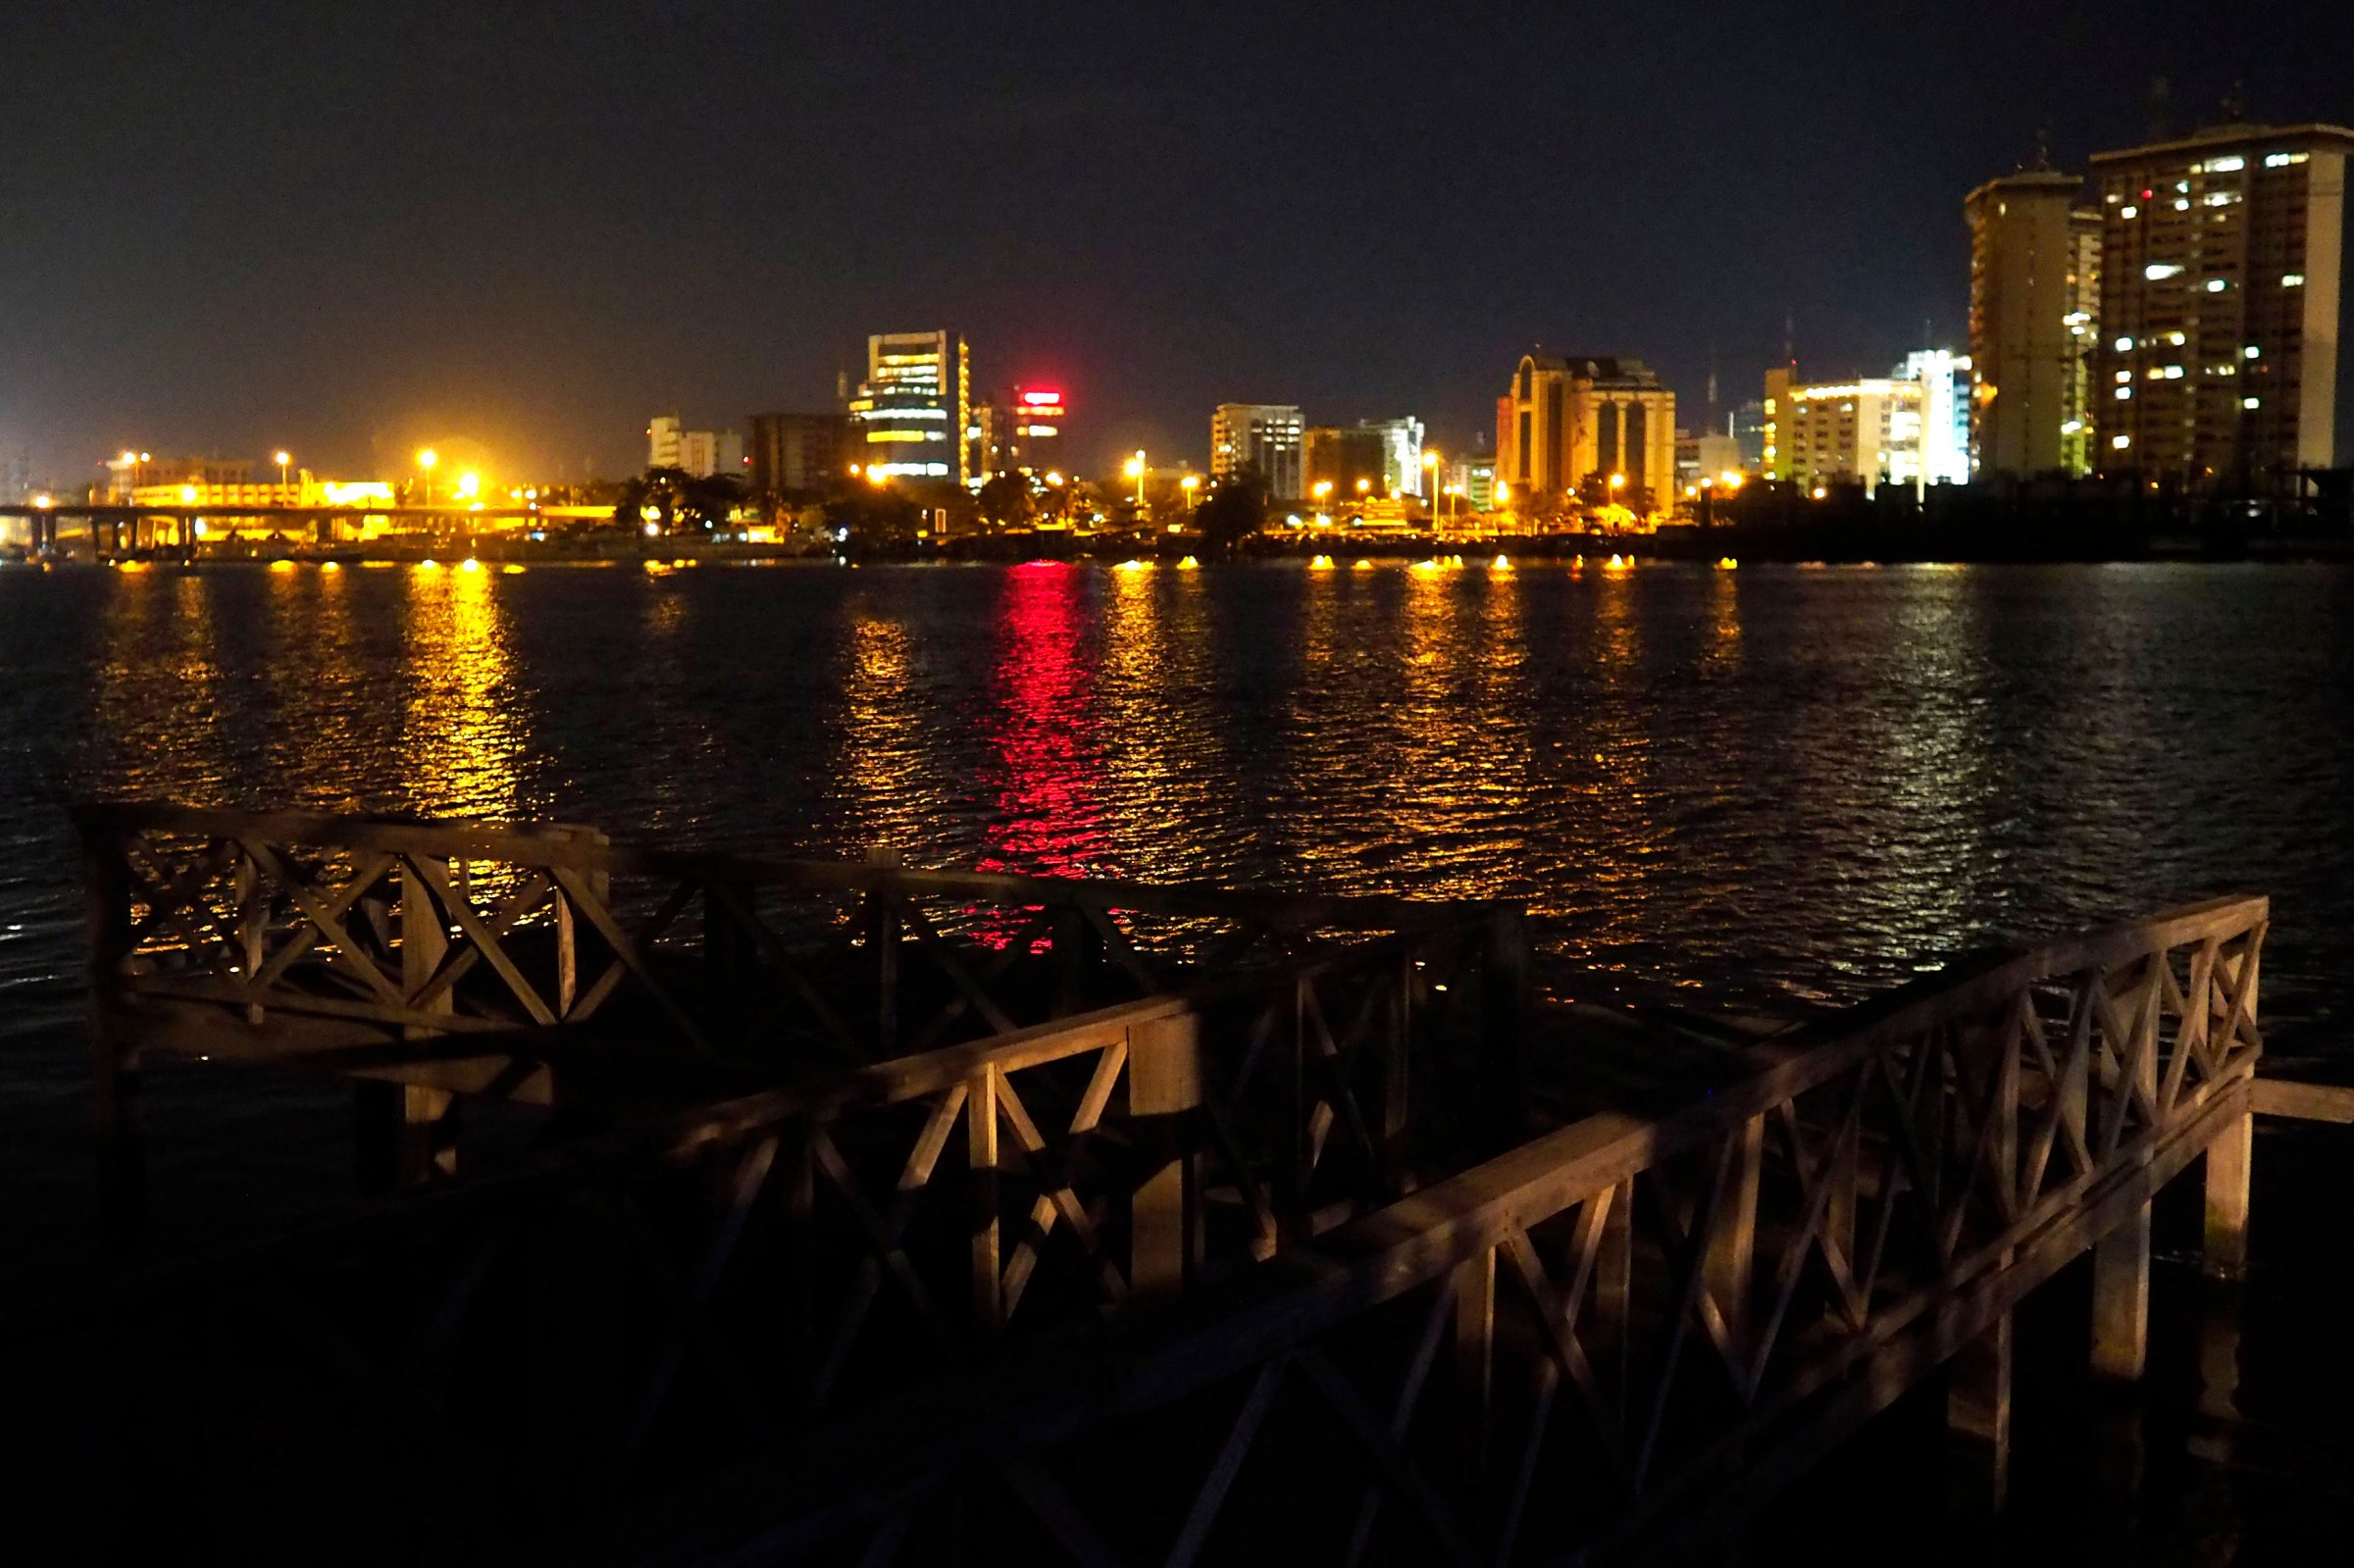 The Victoria Island waterfront is seen from the Ikoyi neighbourhood in Lagos